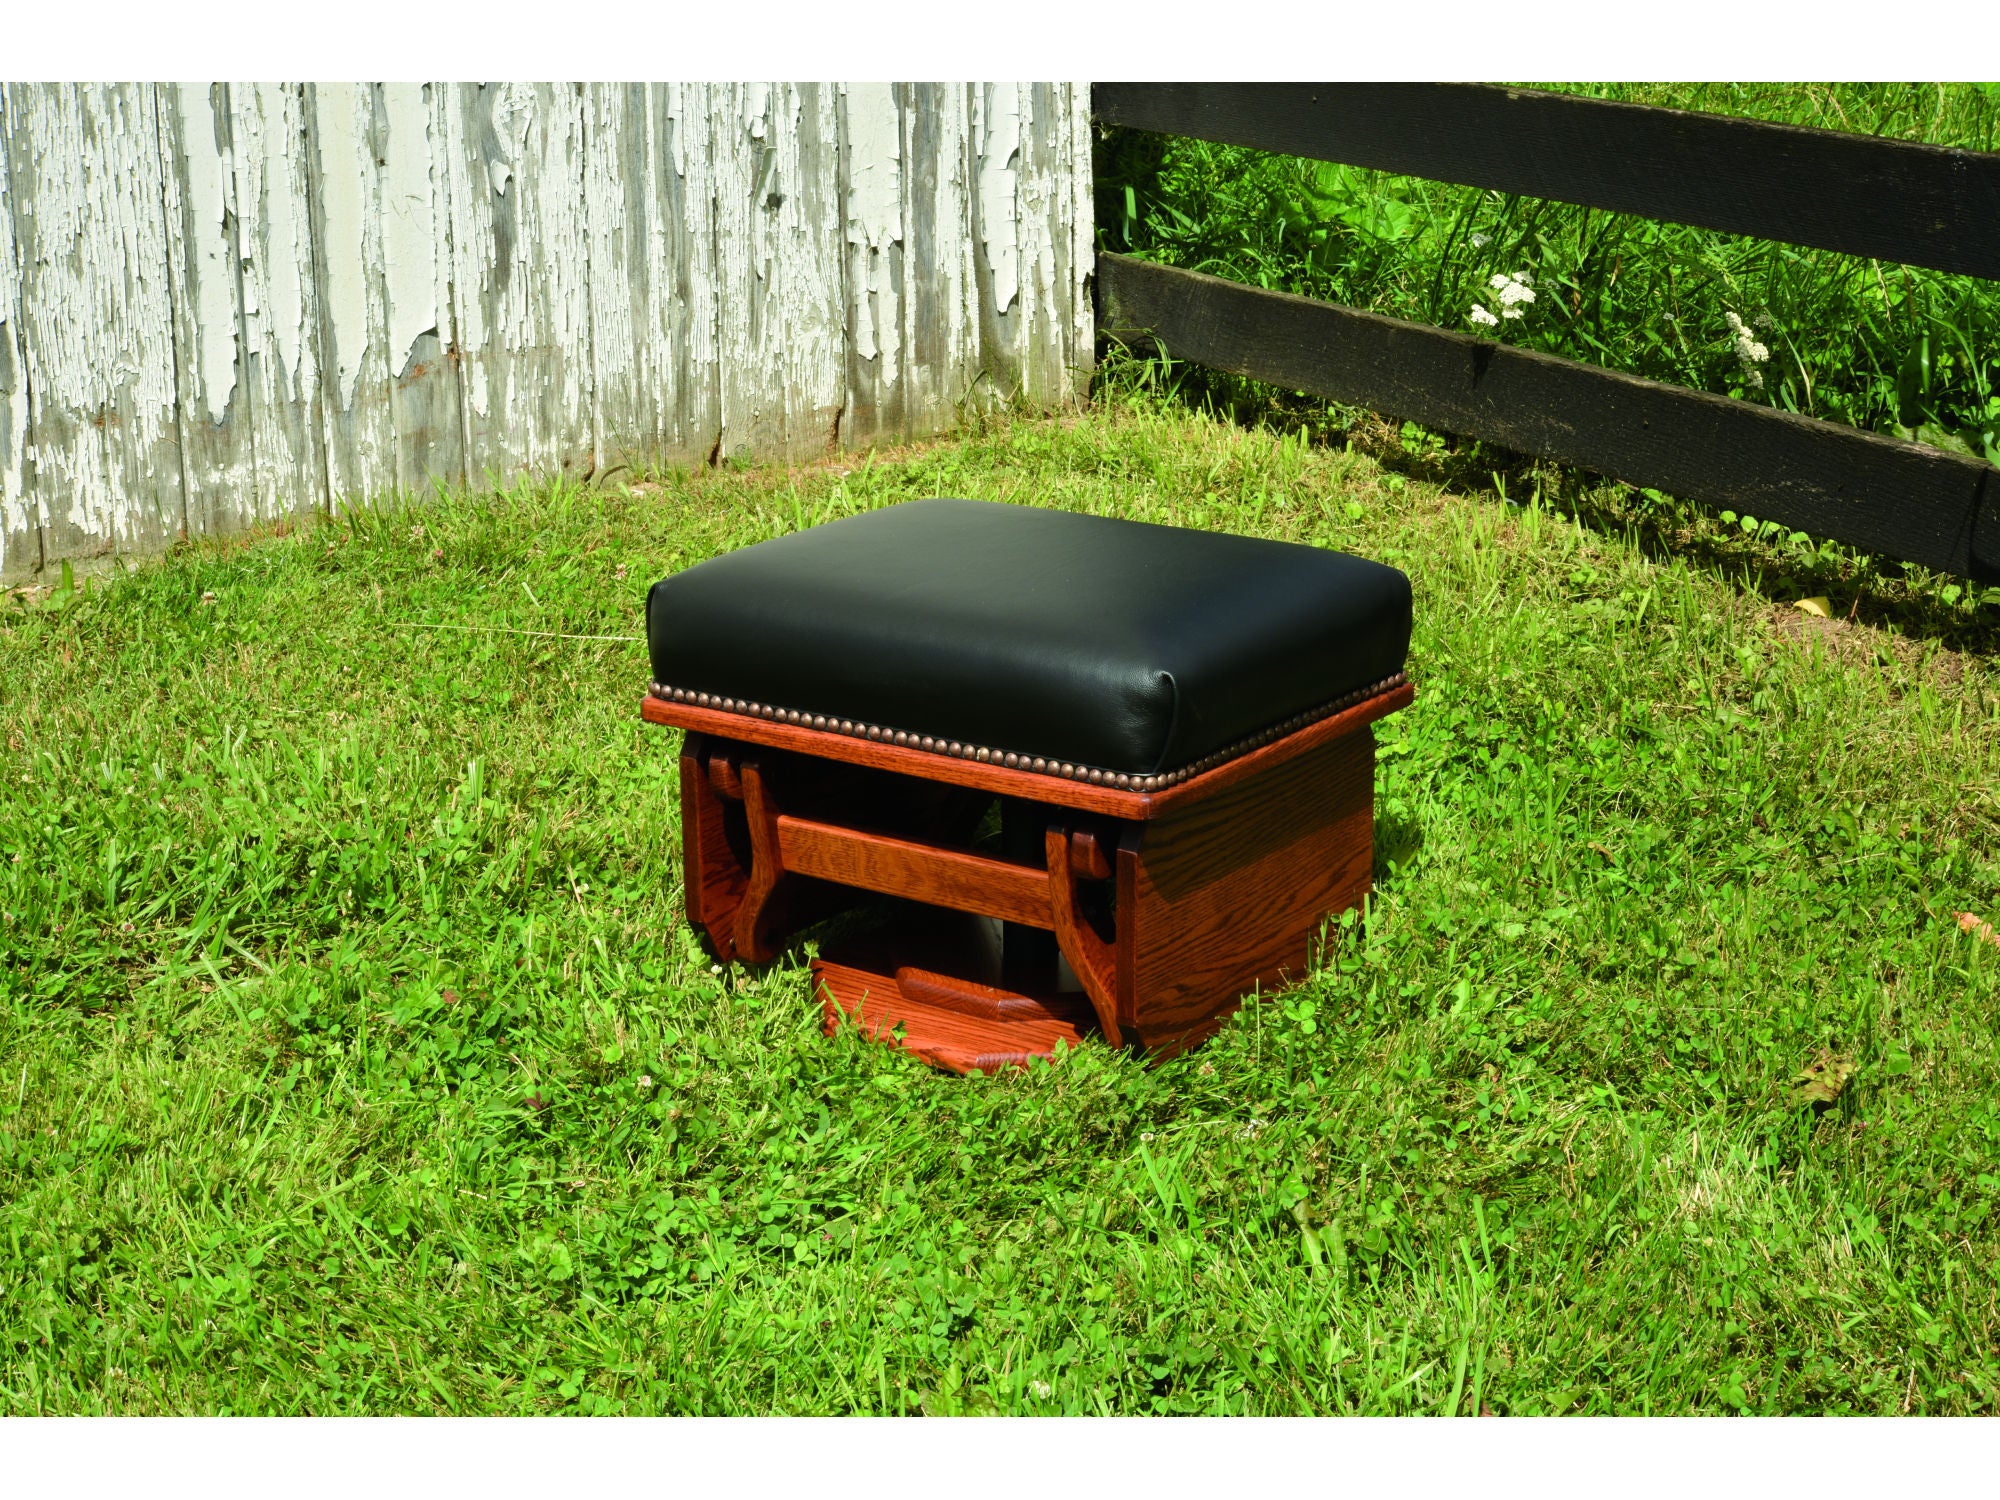 Amish Mission 20.5" Ottoman with Plat Form Base & Solid Sides